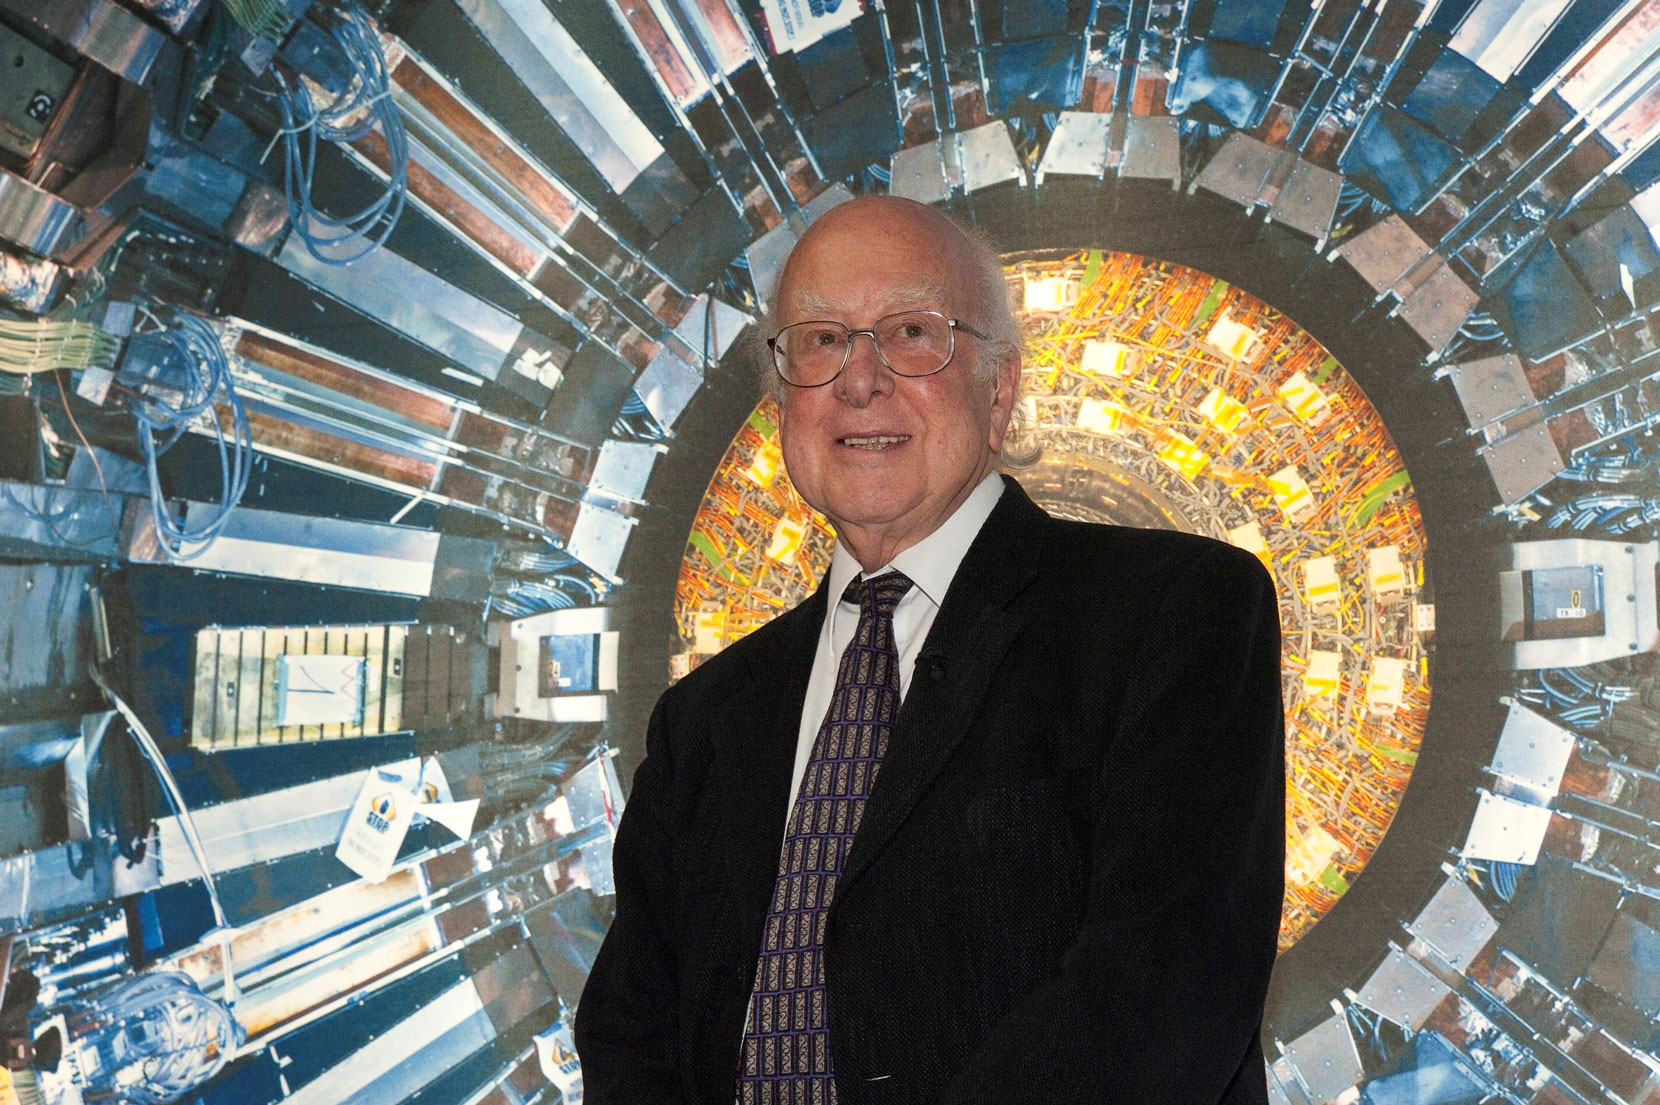 Peter Higgs at the launch of the Collider exhibition.